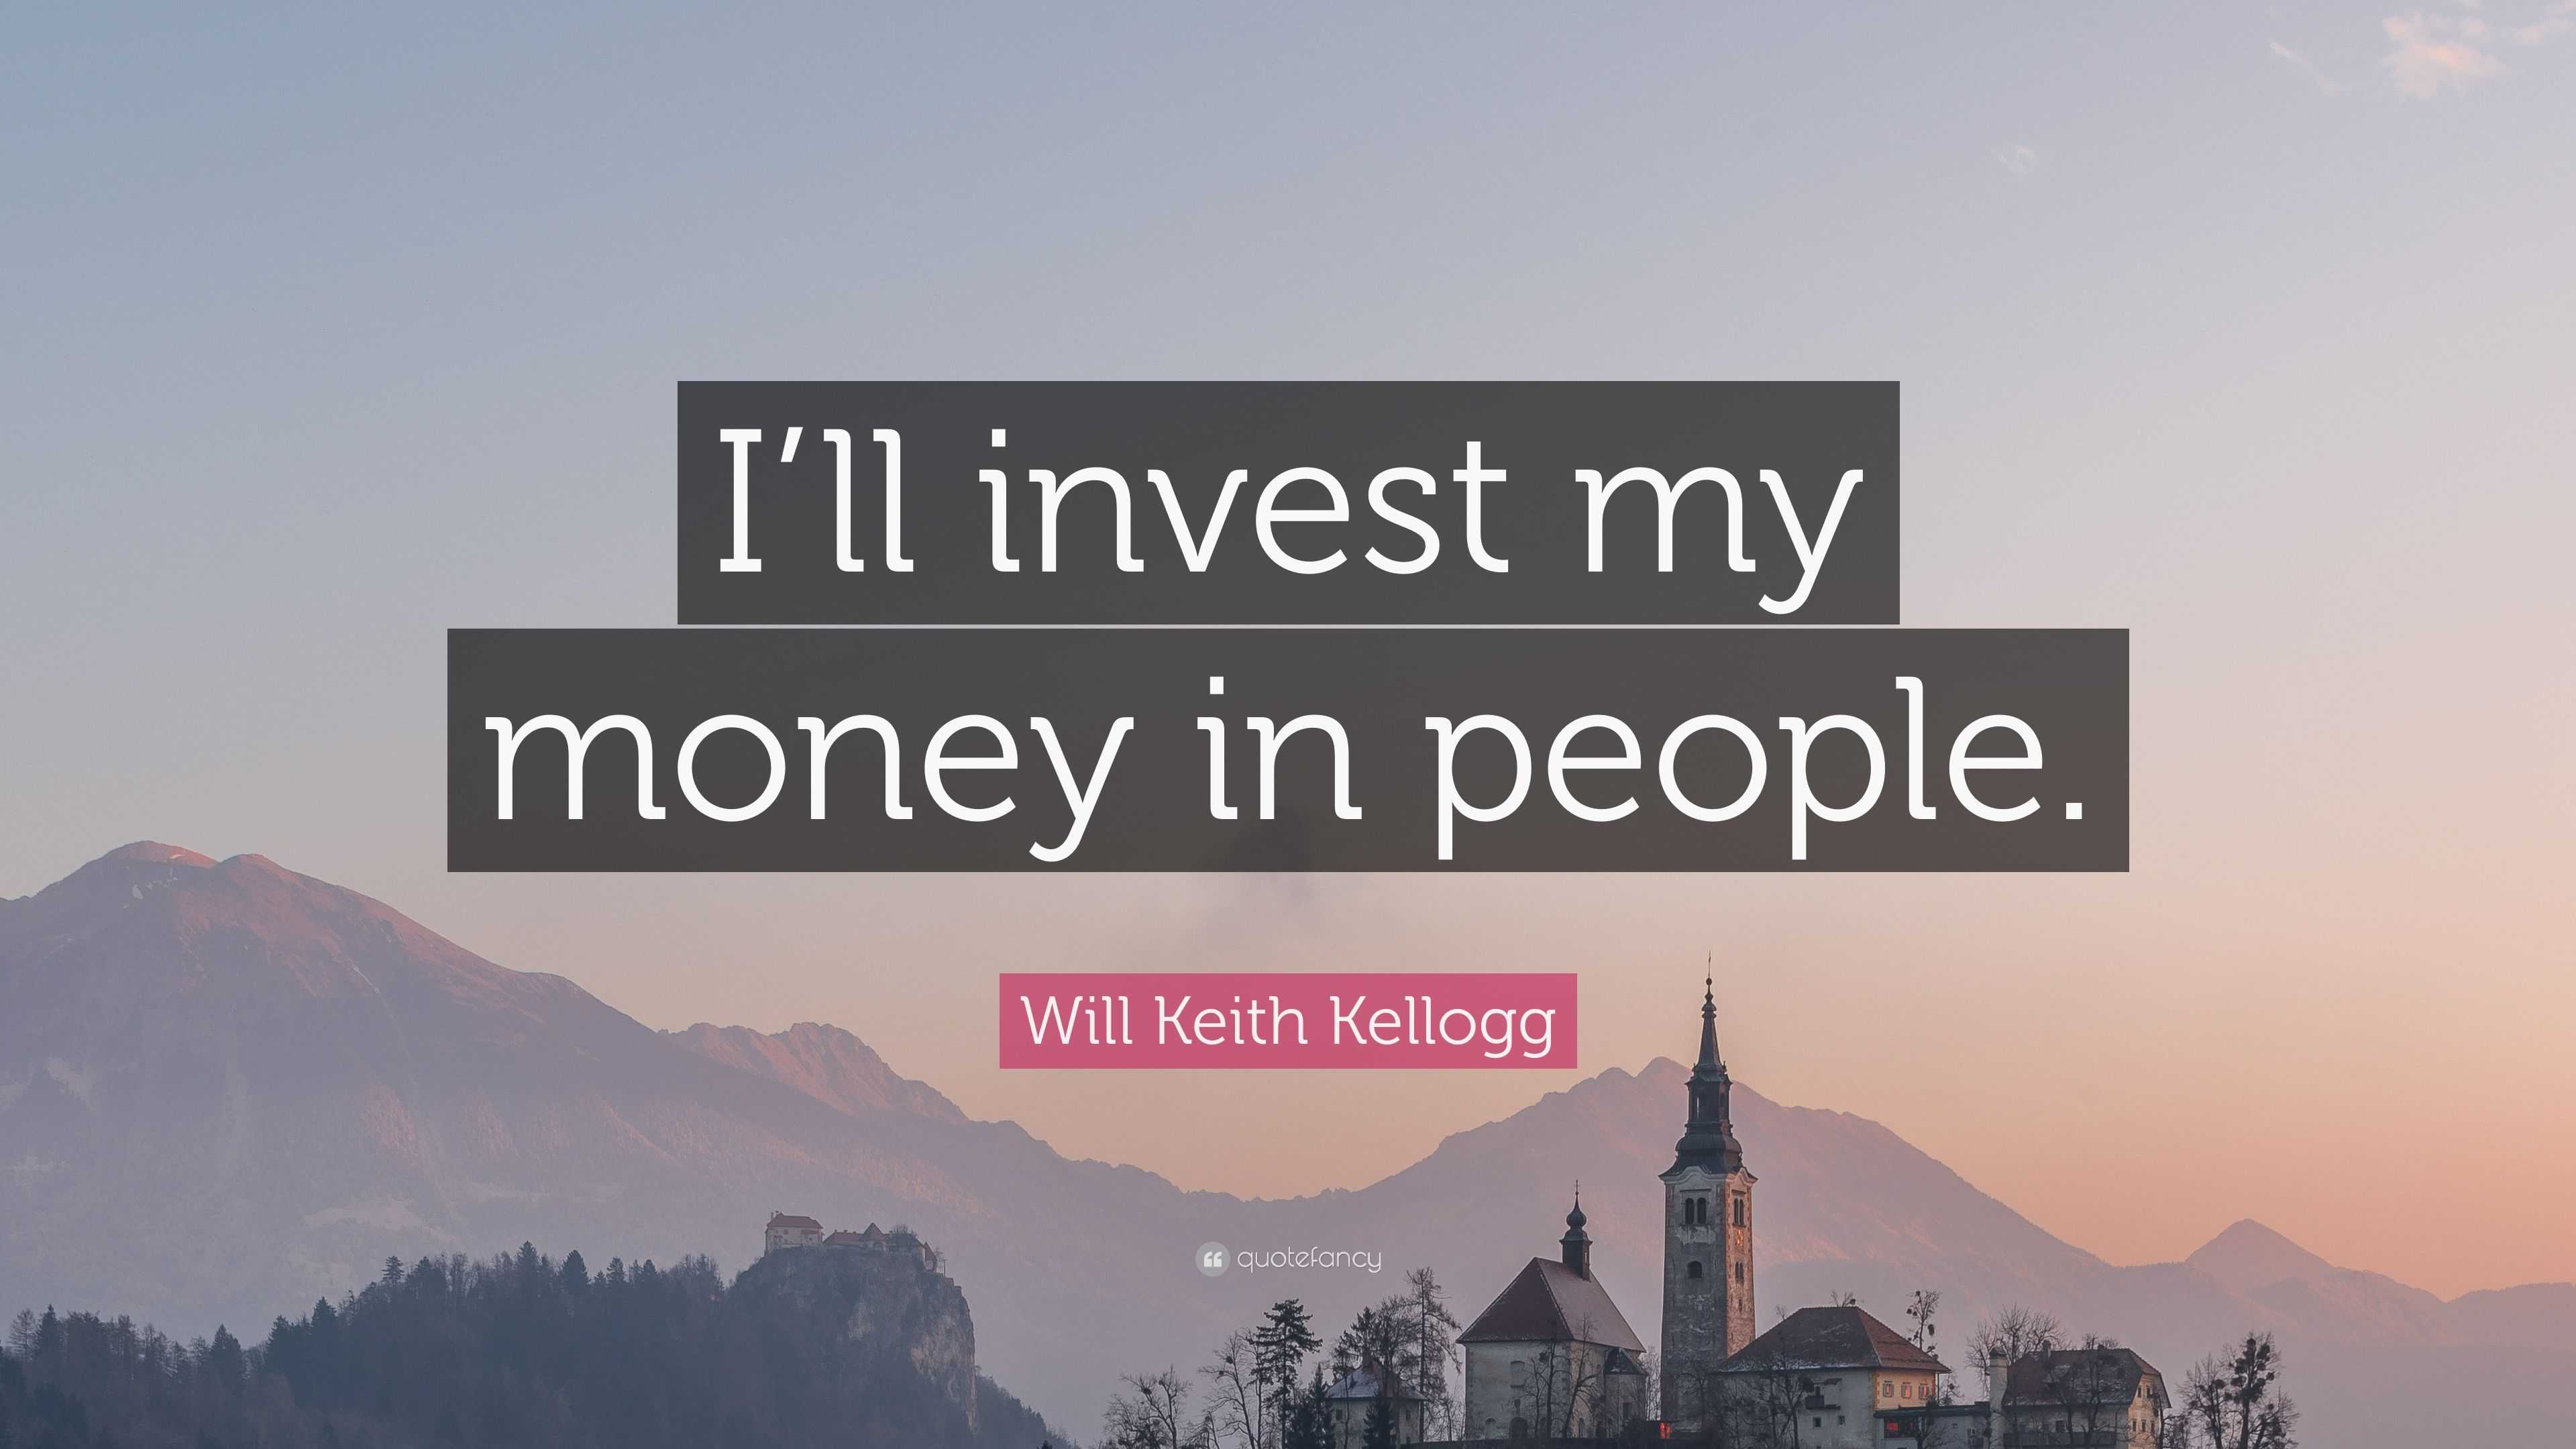 Will Keith Kellogg Quote: “I’ll invest my money in people.”